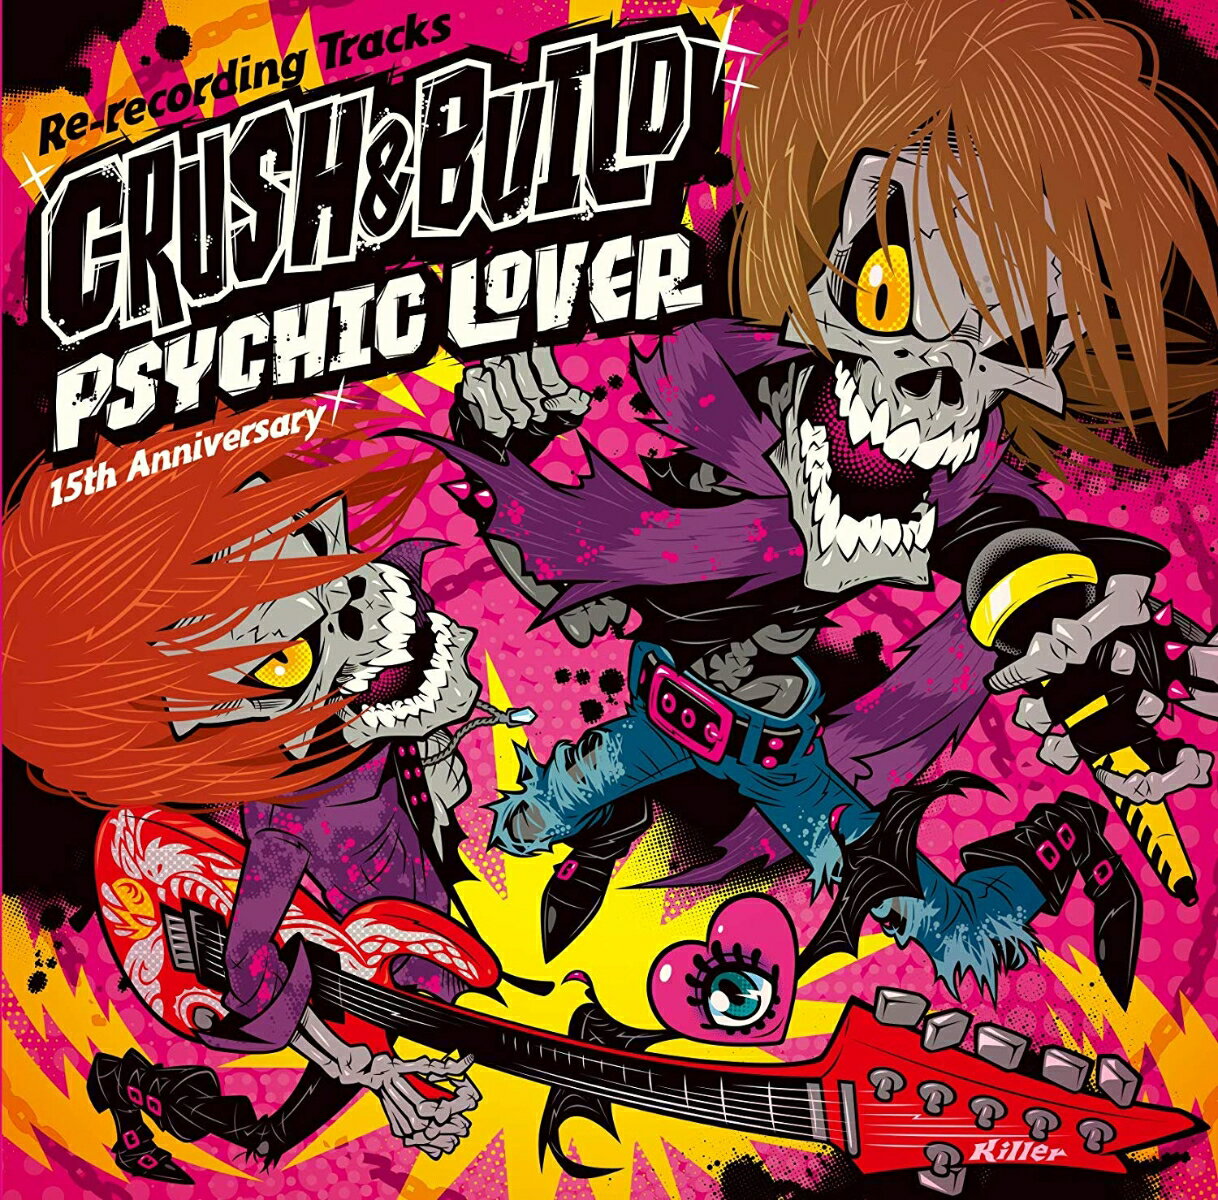 PSYCHIC LOVER 15th Anniversary Re-recording Tracks ～CRUSH & BUILD～ [ PSYCHIC LOVER ]